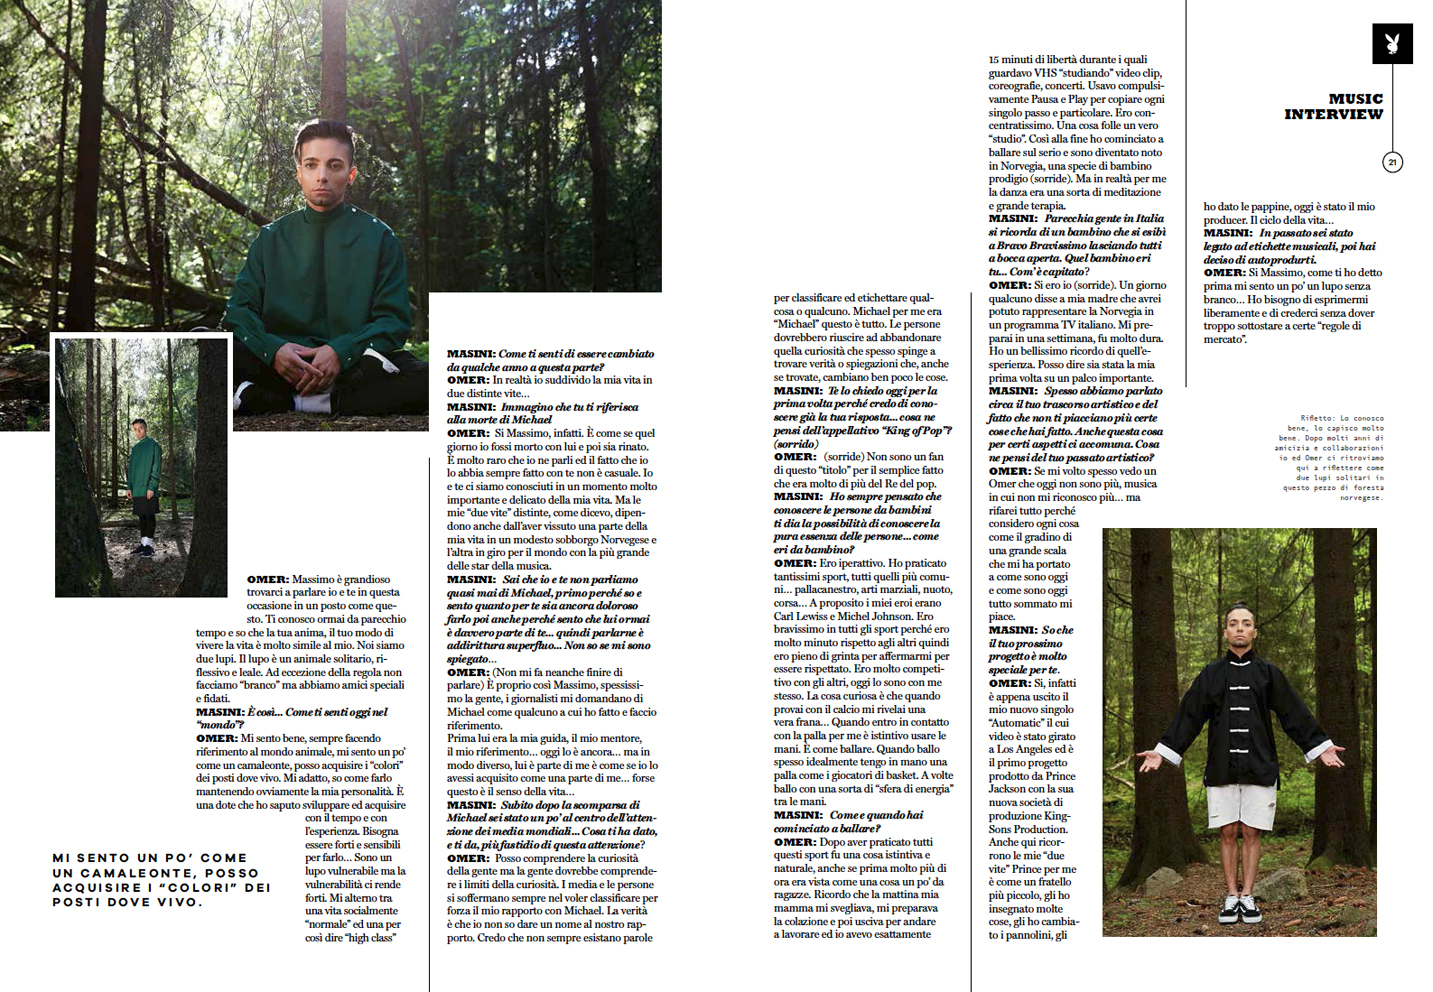 Talking with Omer Bhatti – PLAYBOY Italy